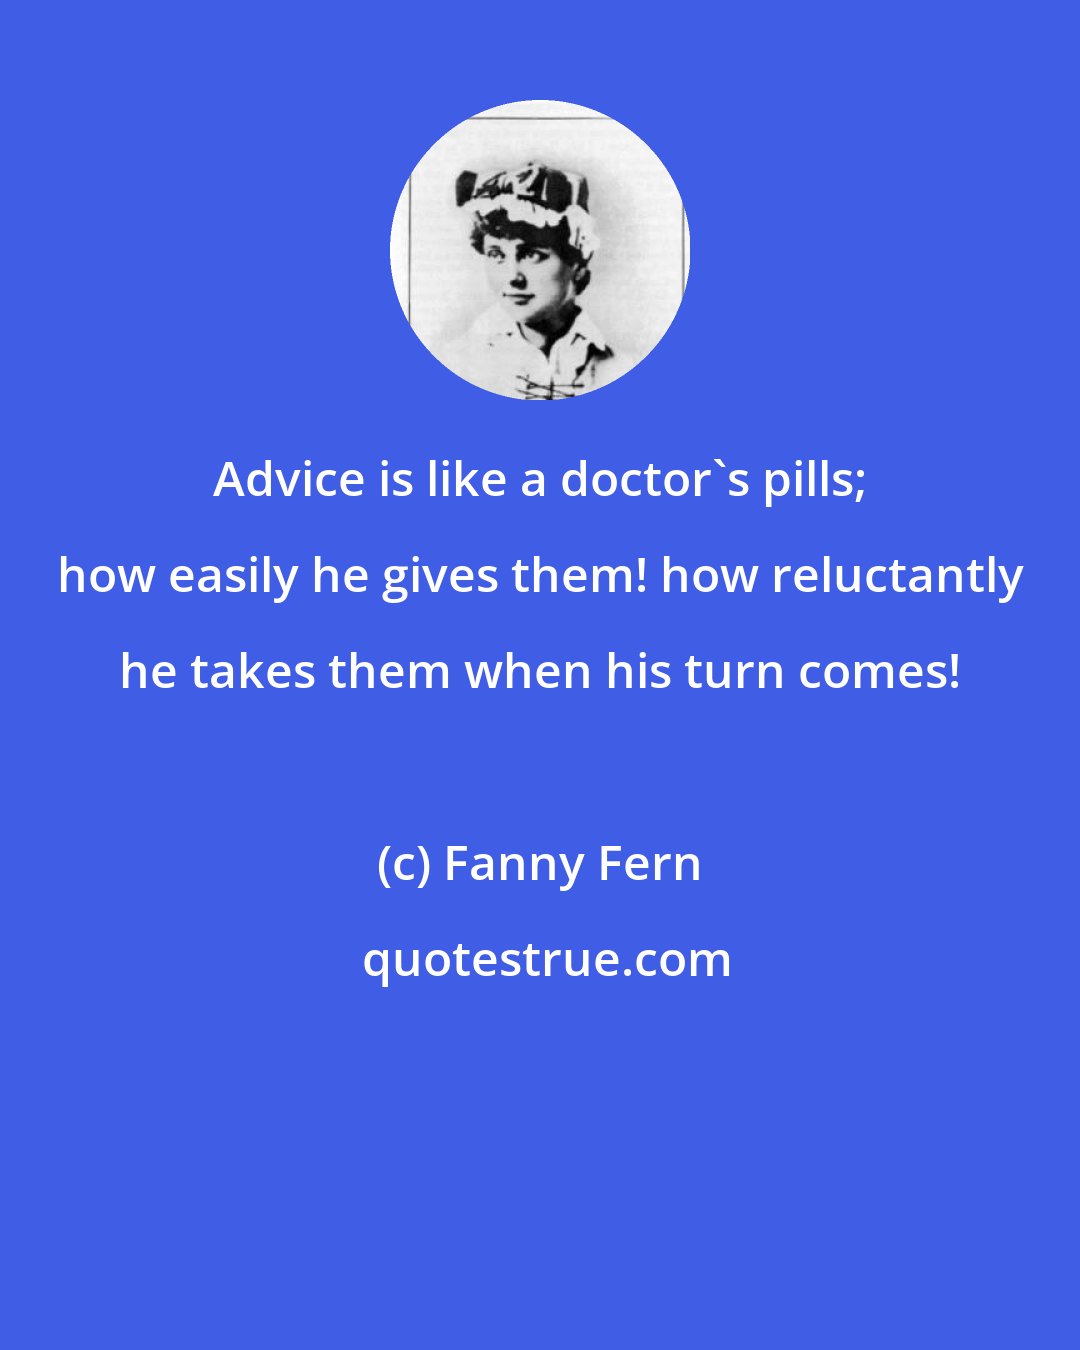 Fanny Fern: Advice is like a doctor's pills; how easily he gives them! how reluctantly he takes them when his turn comes!